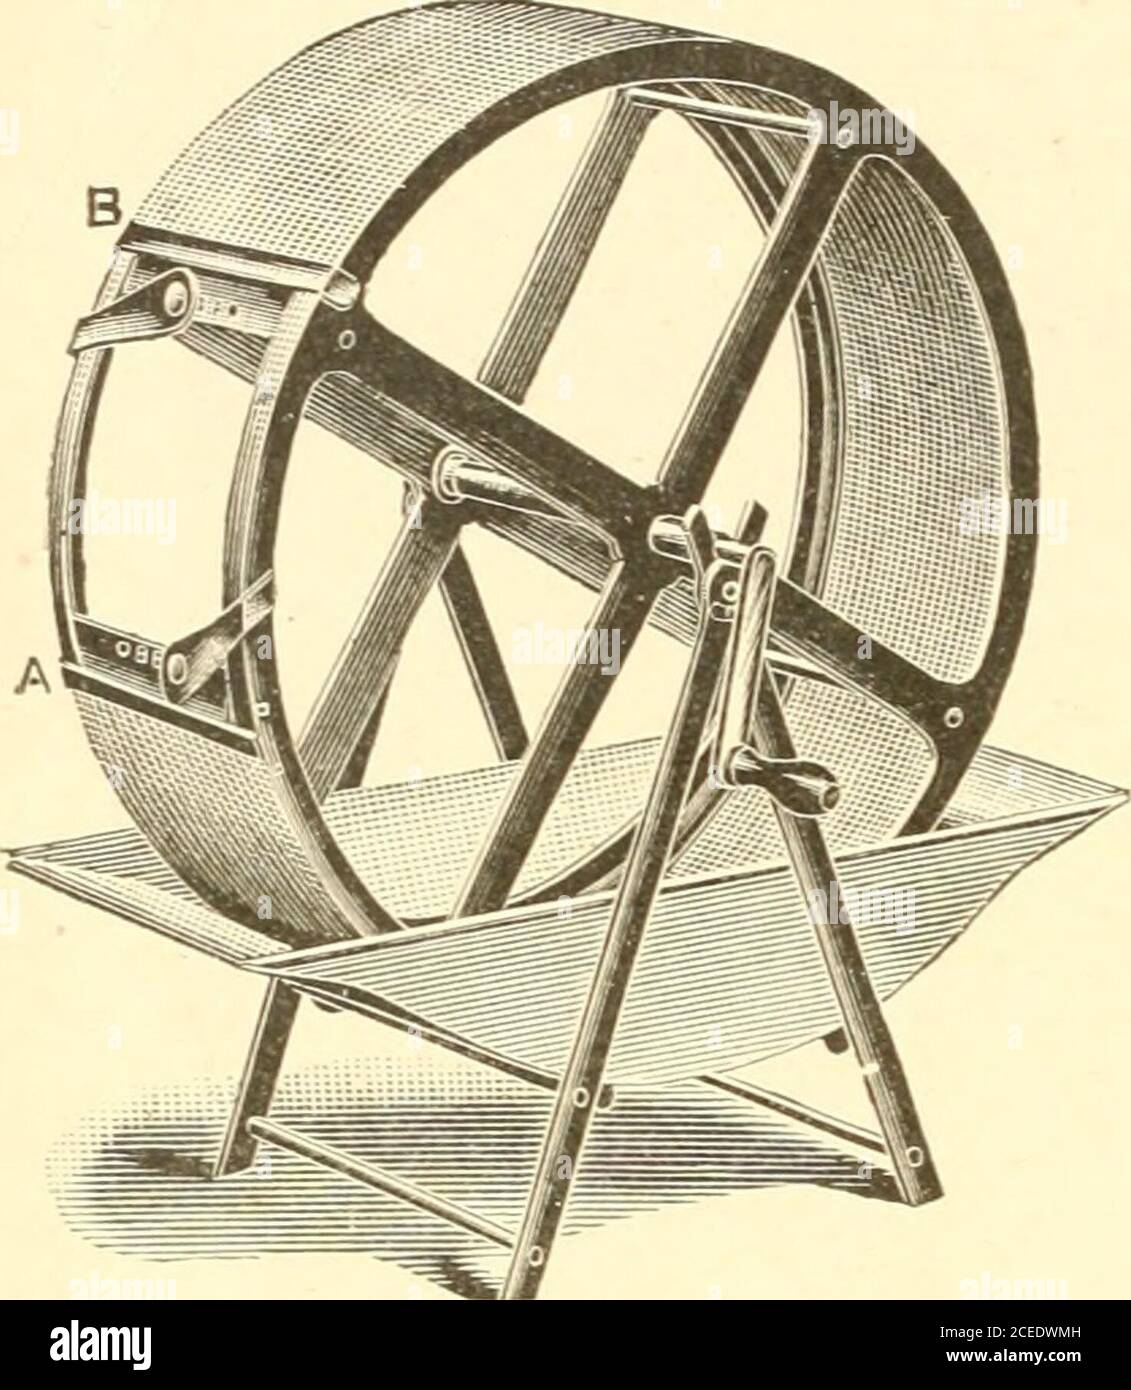 . The book of photography; practical, theoretical and applied. of dish shown by Fig. 193, inwhich the film is passed under the twobridges at each end, complete immersionin the developer thus being assured.Another device is shown by Fig. 194, where the film is drawn under a bent rod, cann-ing a revolving roller, which may be ad-justed to any height to suit different depths &gt; Z^ a Fis 194.—Bent Eod Arrangement for Develop-ing Films. of solution. There are also other devicesfor the purpose. One of these is in theform of a revolving drum, round theperiphery of which the film is fastened,by the Stock Photo